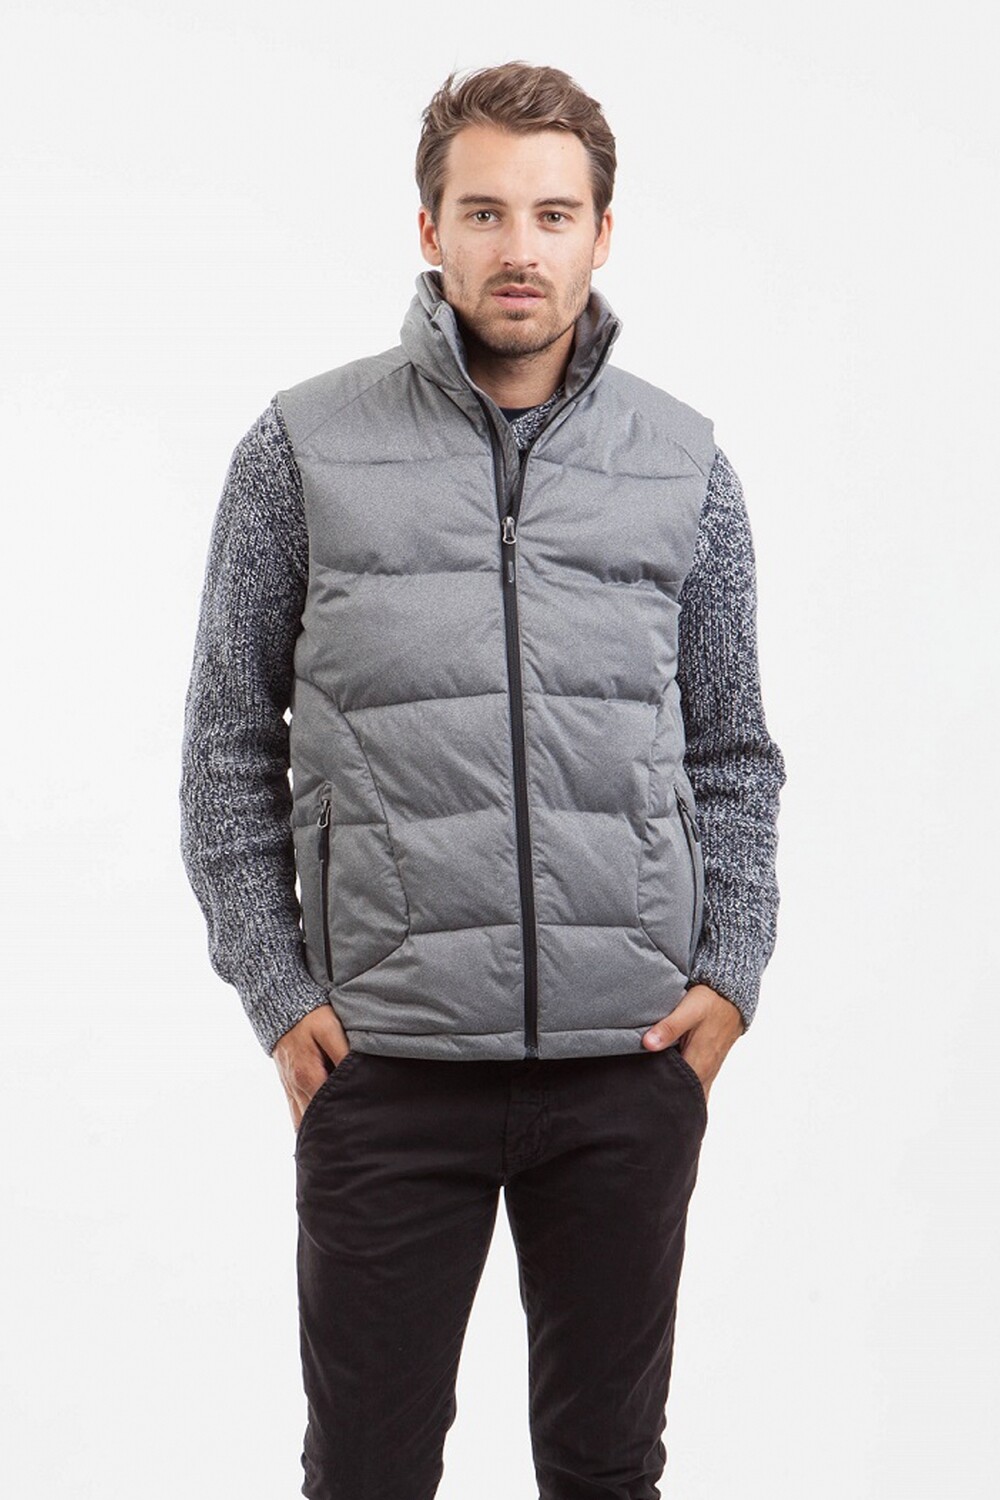 Warm switcher quilted vest First class